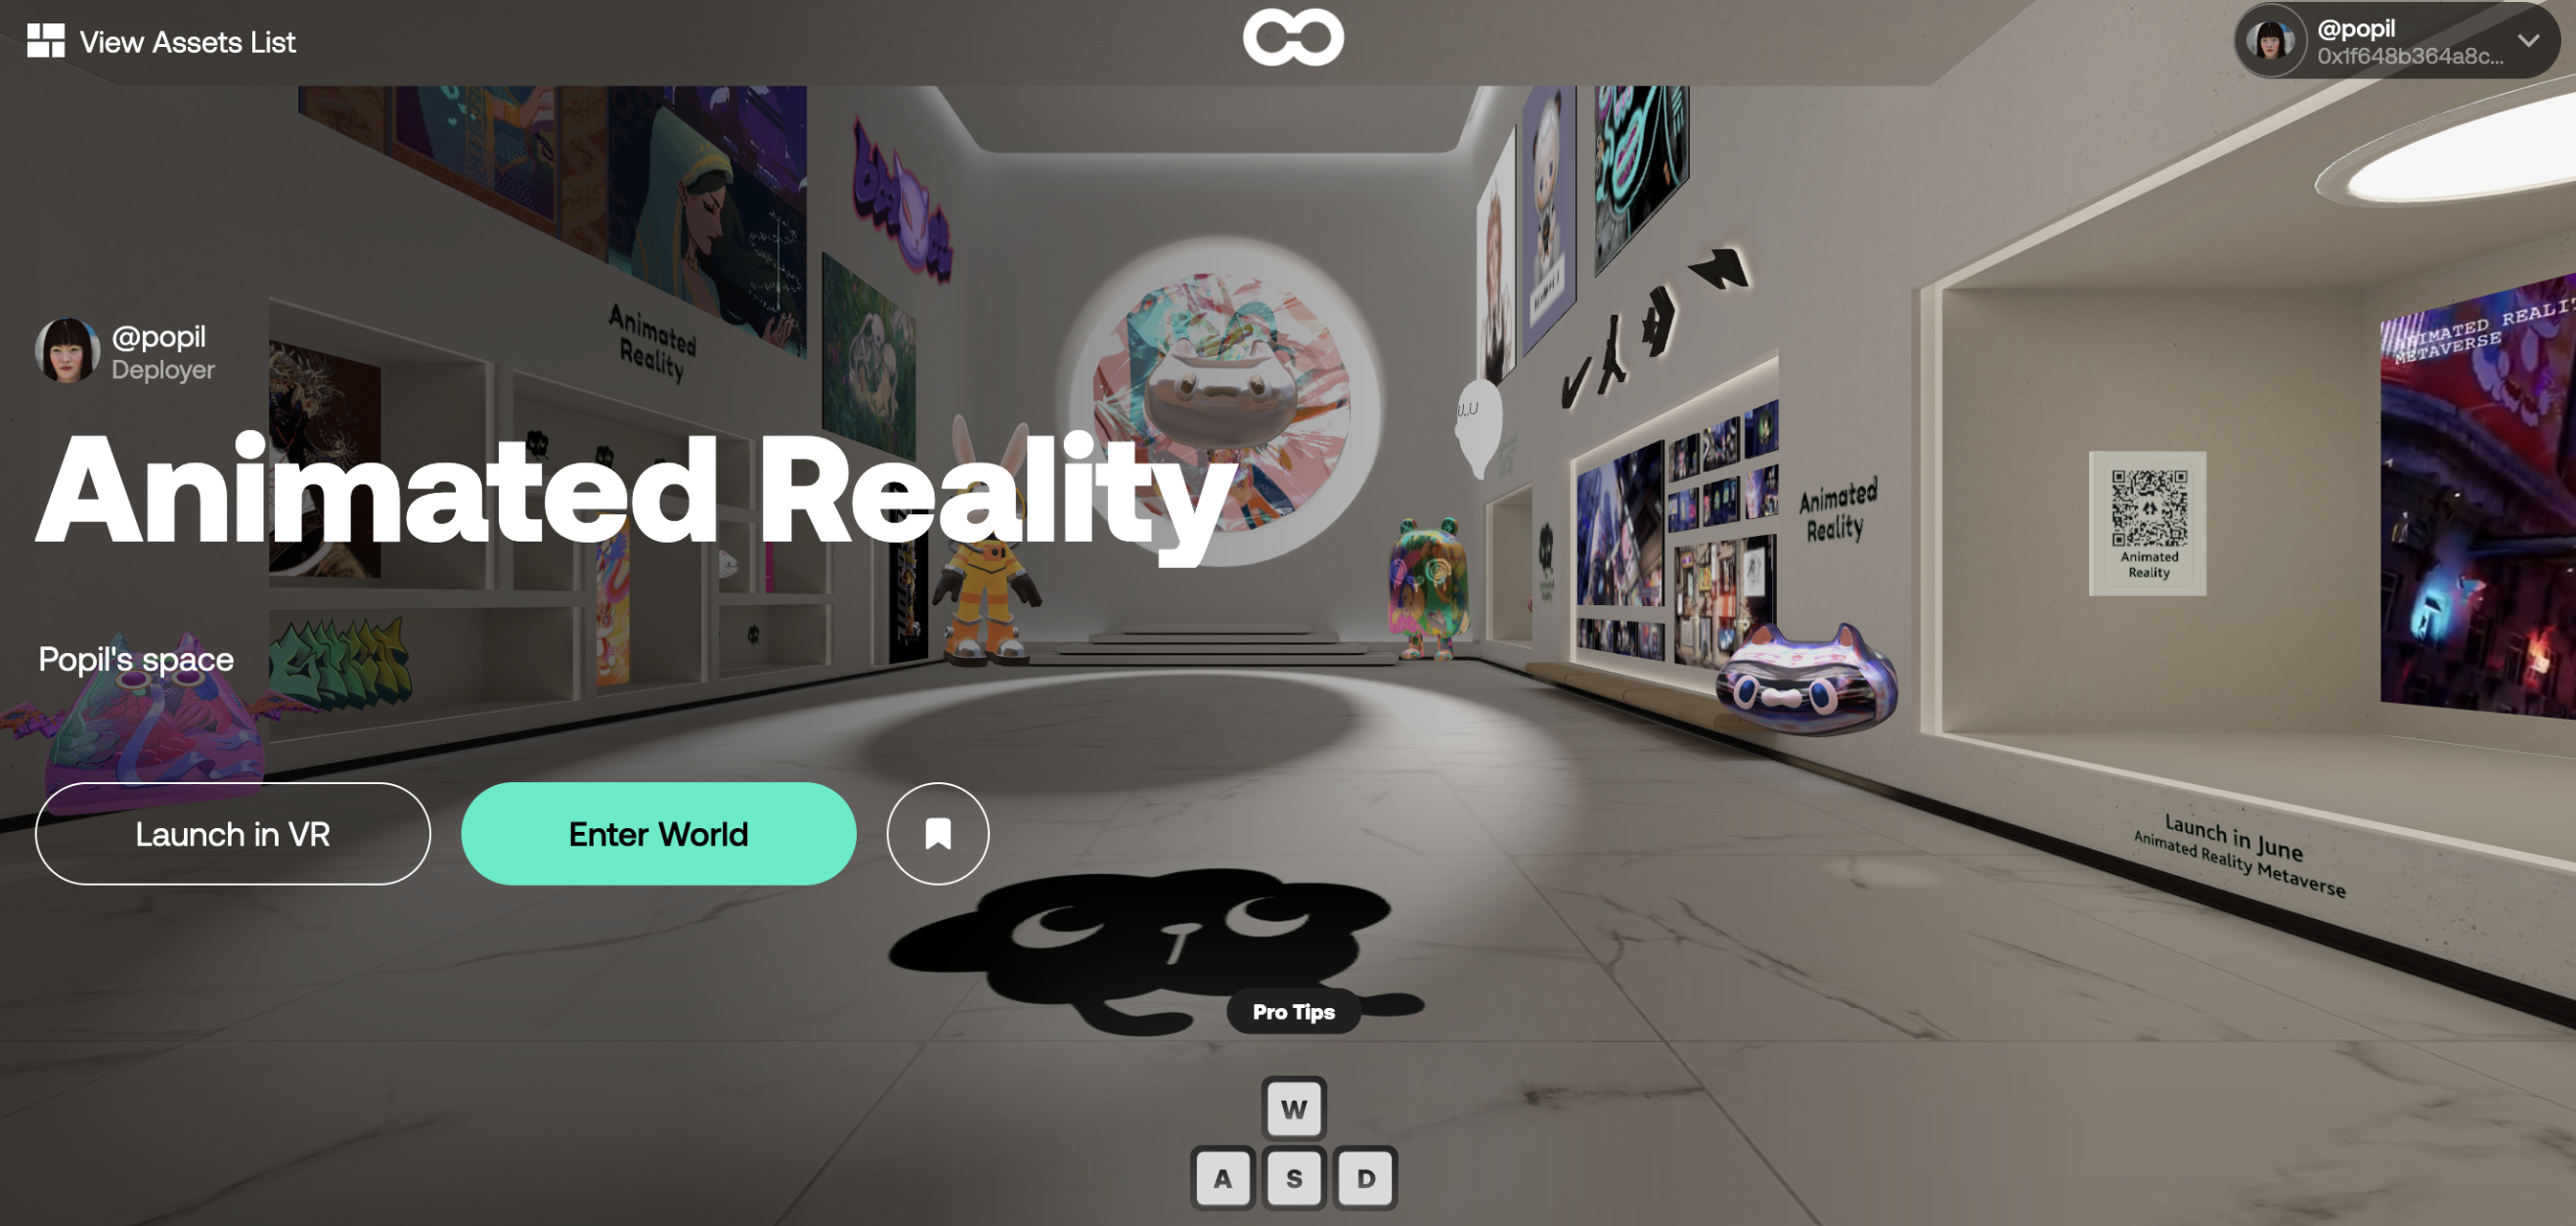 Animated Reality Gallery